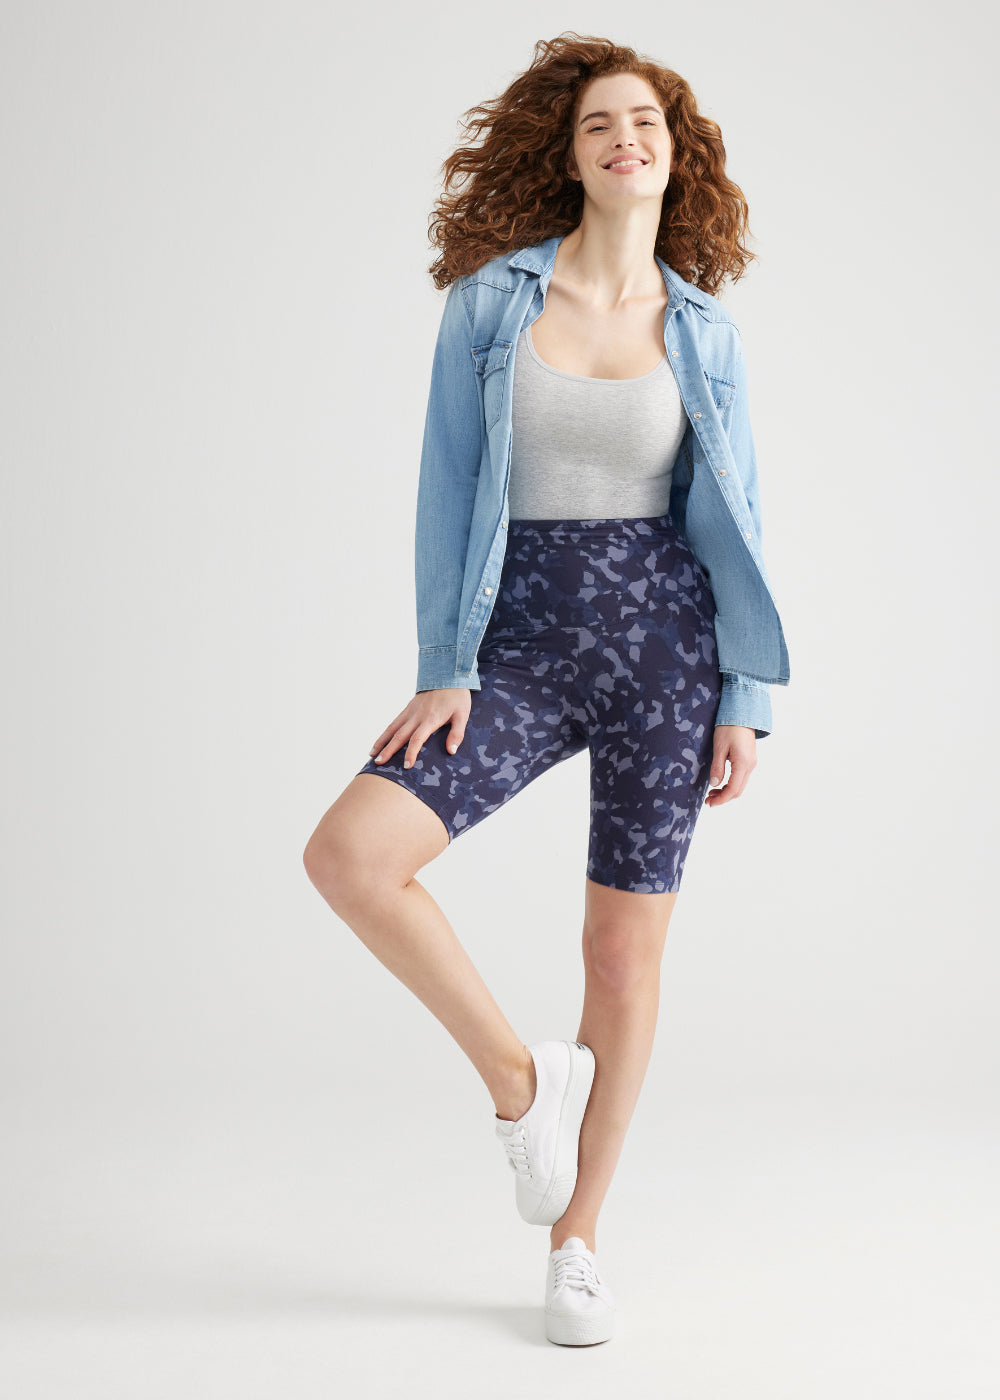 Mel Shaping Biker Short - Cotton Stretch from Yummie in Eclipse Blue Camo  - 1